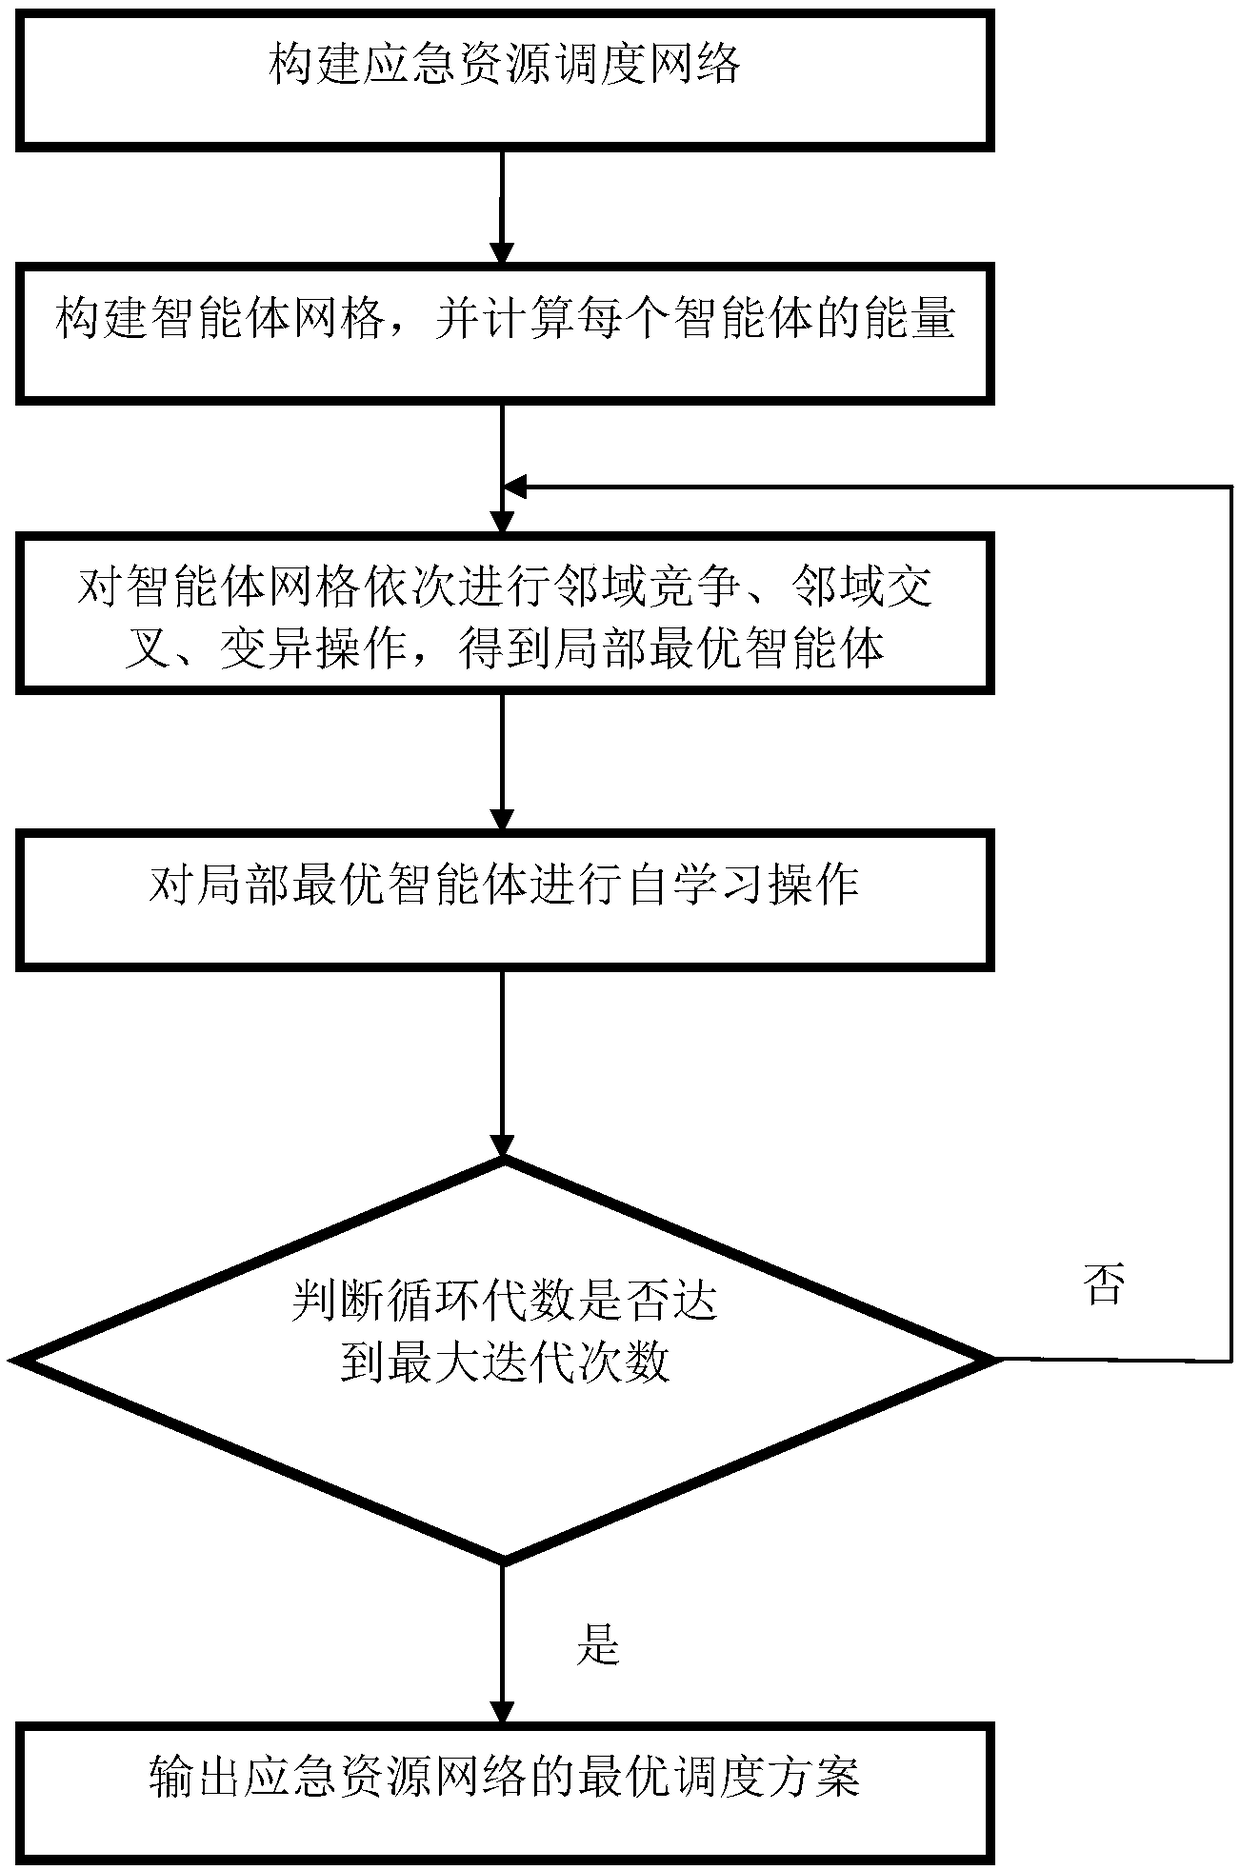 Emergency resource scheduling method for disaster relief based on multi-agent genetic algorithm